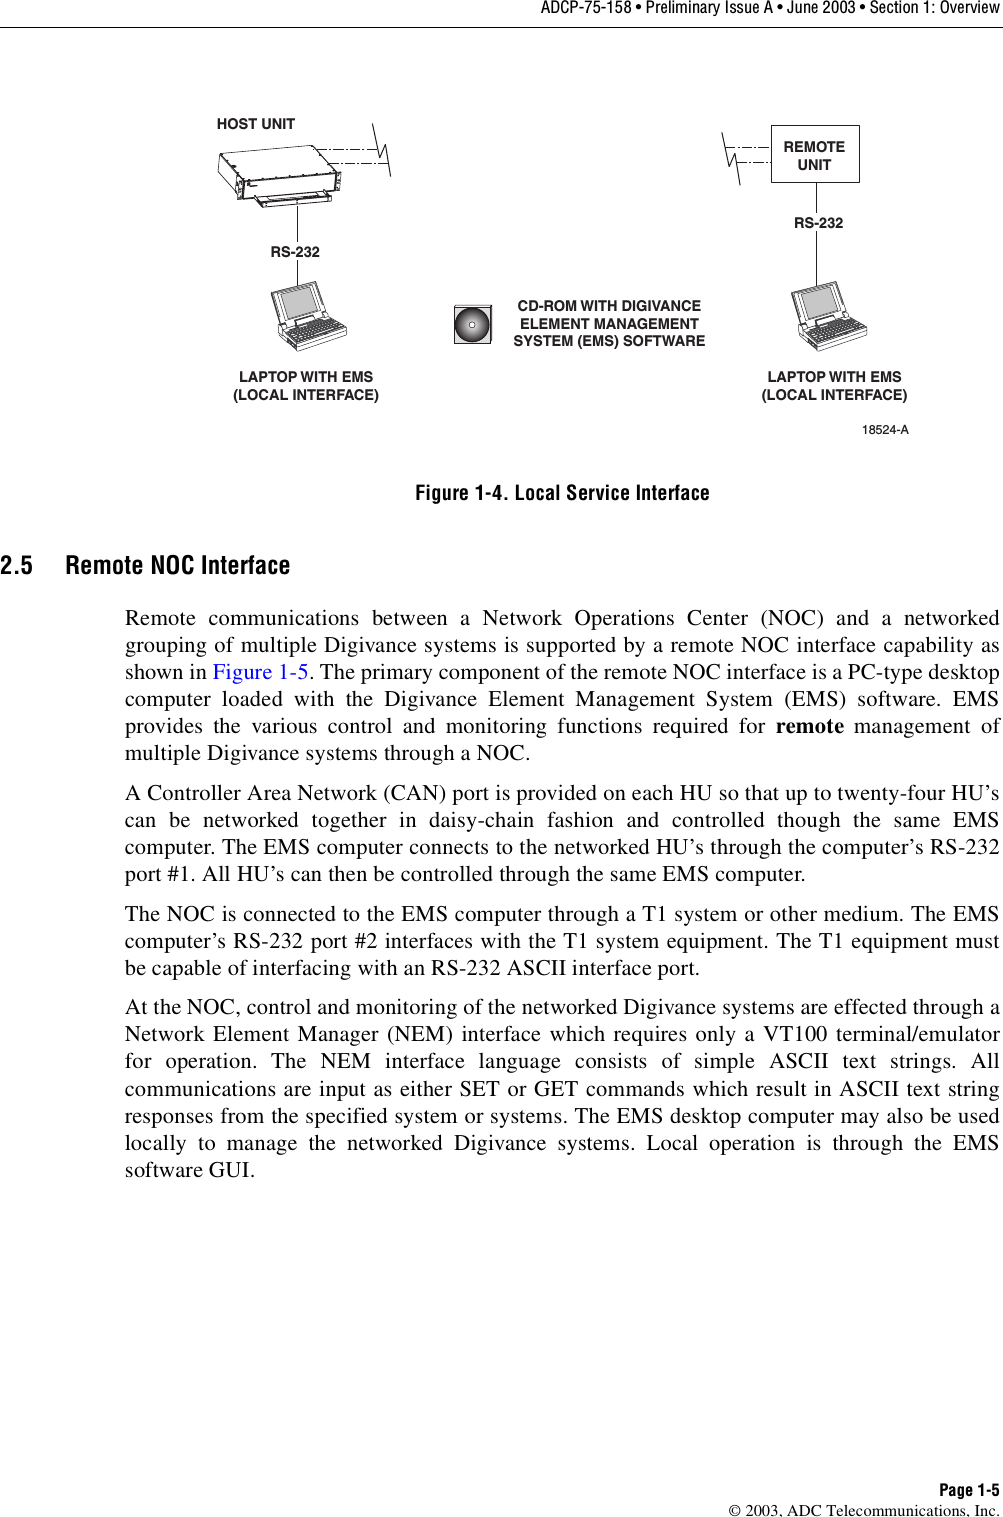 ADCP-75-158 • Preliminary Issue A • June 2003 • Section 1: OverviewPage 1-5© 2003, ADC Telecommunications, Inc.Figure 1-4. Local Service Interface2.5 Remote NOC InterfaceRemote communications between a Network Operations Center (NOC) and a networkedgrouping of multiple Digivance systems is supported by a remote NOC interface capability asshown in Figure 1-5. The primary component of the remote NOC interface is a PC-type desktopcomputer loaded with the Digivance Element Management System (EMS) software. EMSprovides the various control and monitoring functions required for remote management ofmultiple Digivance systems through a NOC. A Controller Area Network (CAN) port is provided on each HU so that up to twenty-four HU’scan be networked together in daisy-chain fashion and controlled though the same EMScomputer. The EMS computer connects to the networked HU’s through the computer’s RS-232port #1. All HU’s can then be controlled through the same EMS computer. The NOC is connected to the EMS computer through a T1 system or other medium. The EMScomputer’s RS-232 port #2 interfaces with the T1 system equipment. The T1 equipment mustbe capable of interfacing with an RS-232 ASCII interface port. At the NOC, control and monitoring of the networked Digivance systems are effected through aNetwork Element Manager (NEM) interface which requires only a VT100 terminal/emulatorfor operation. The NEM interface language consists of simple ASCII text strings. Allcommunications are input as either SET or GET commands which result in ASCII text stringresponses from the specified system or systems. The EMS desktop computer may also be usedlocally to manage the networked Digivance systems. Local operation is through the EMSsoftware GUI. HOST UNITLAPTOP WITH EMS(LOCAL INTERFACE)LAPTOP WITH EMS(LOCAL INTERFACE)18524-ACD-ROM WITH DIGIVANCEELEMENT MANAGEMENTSYSTEM (EMS) SOFTWAREREMOTEUNITRS-232RS-232